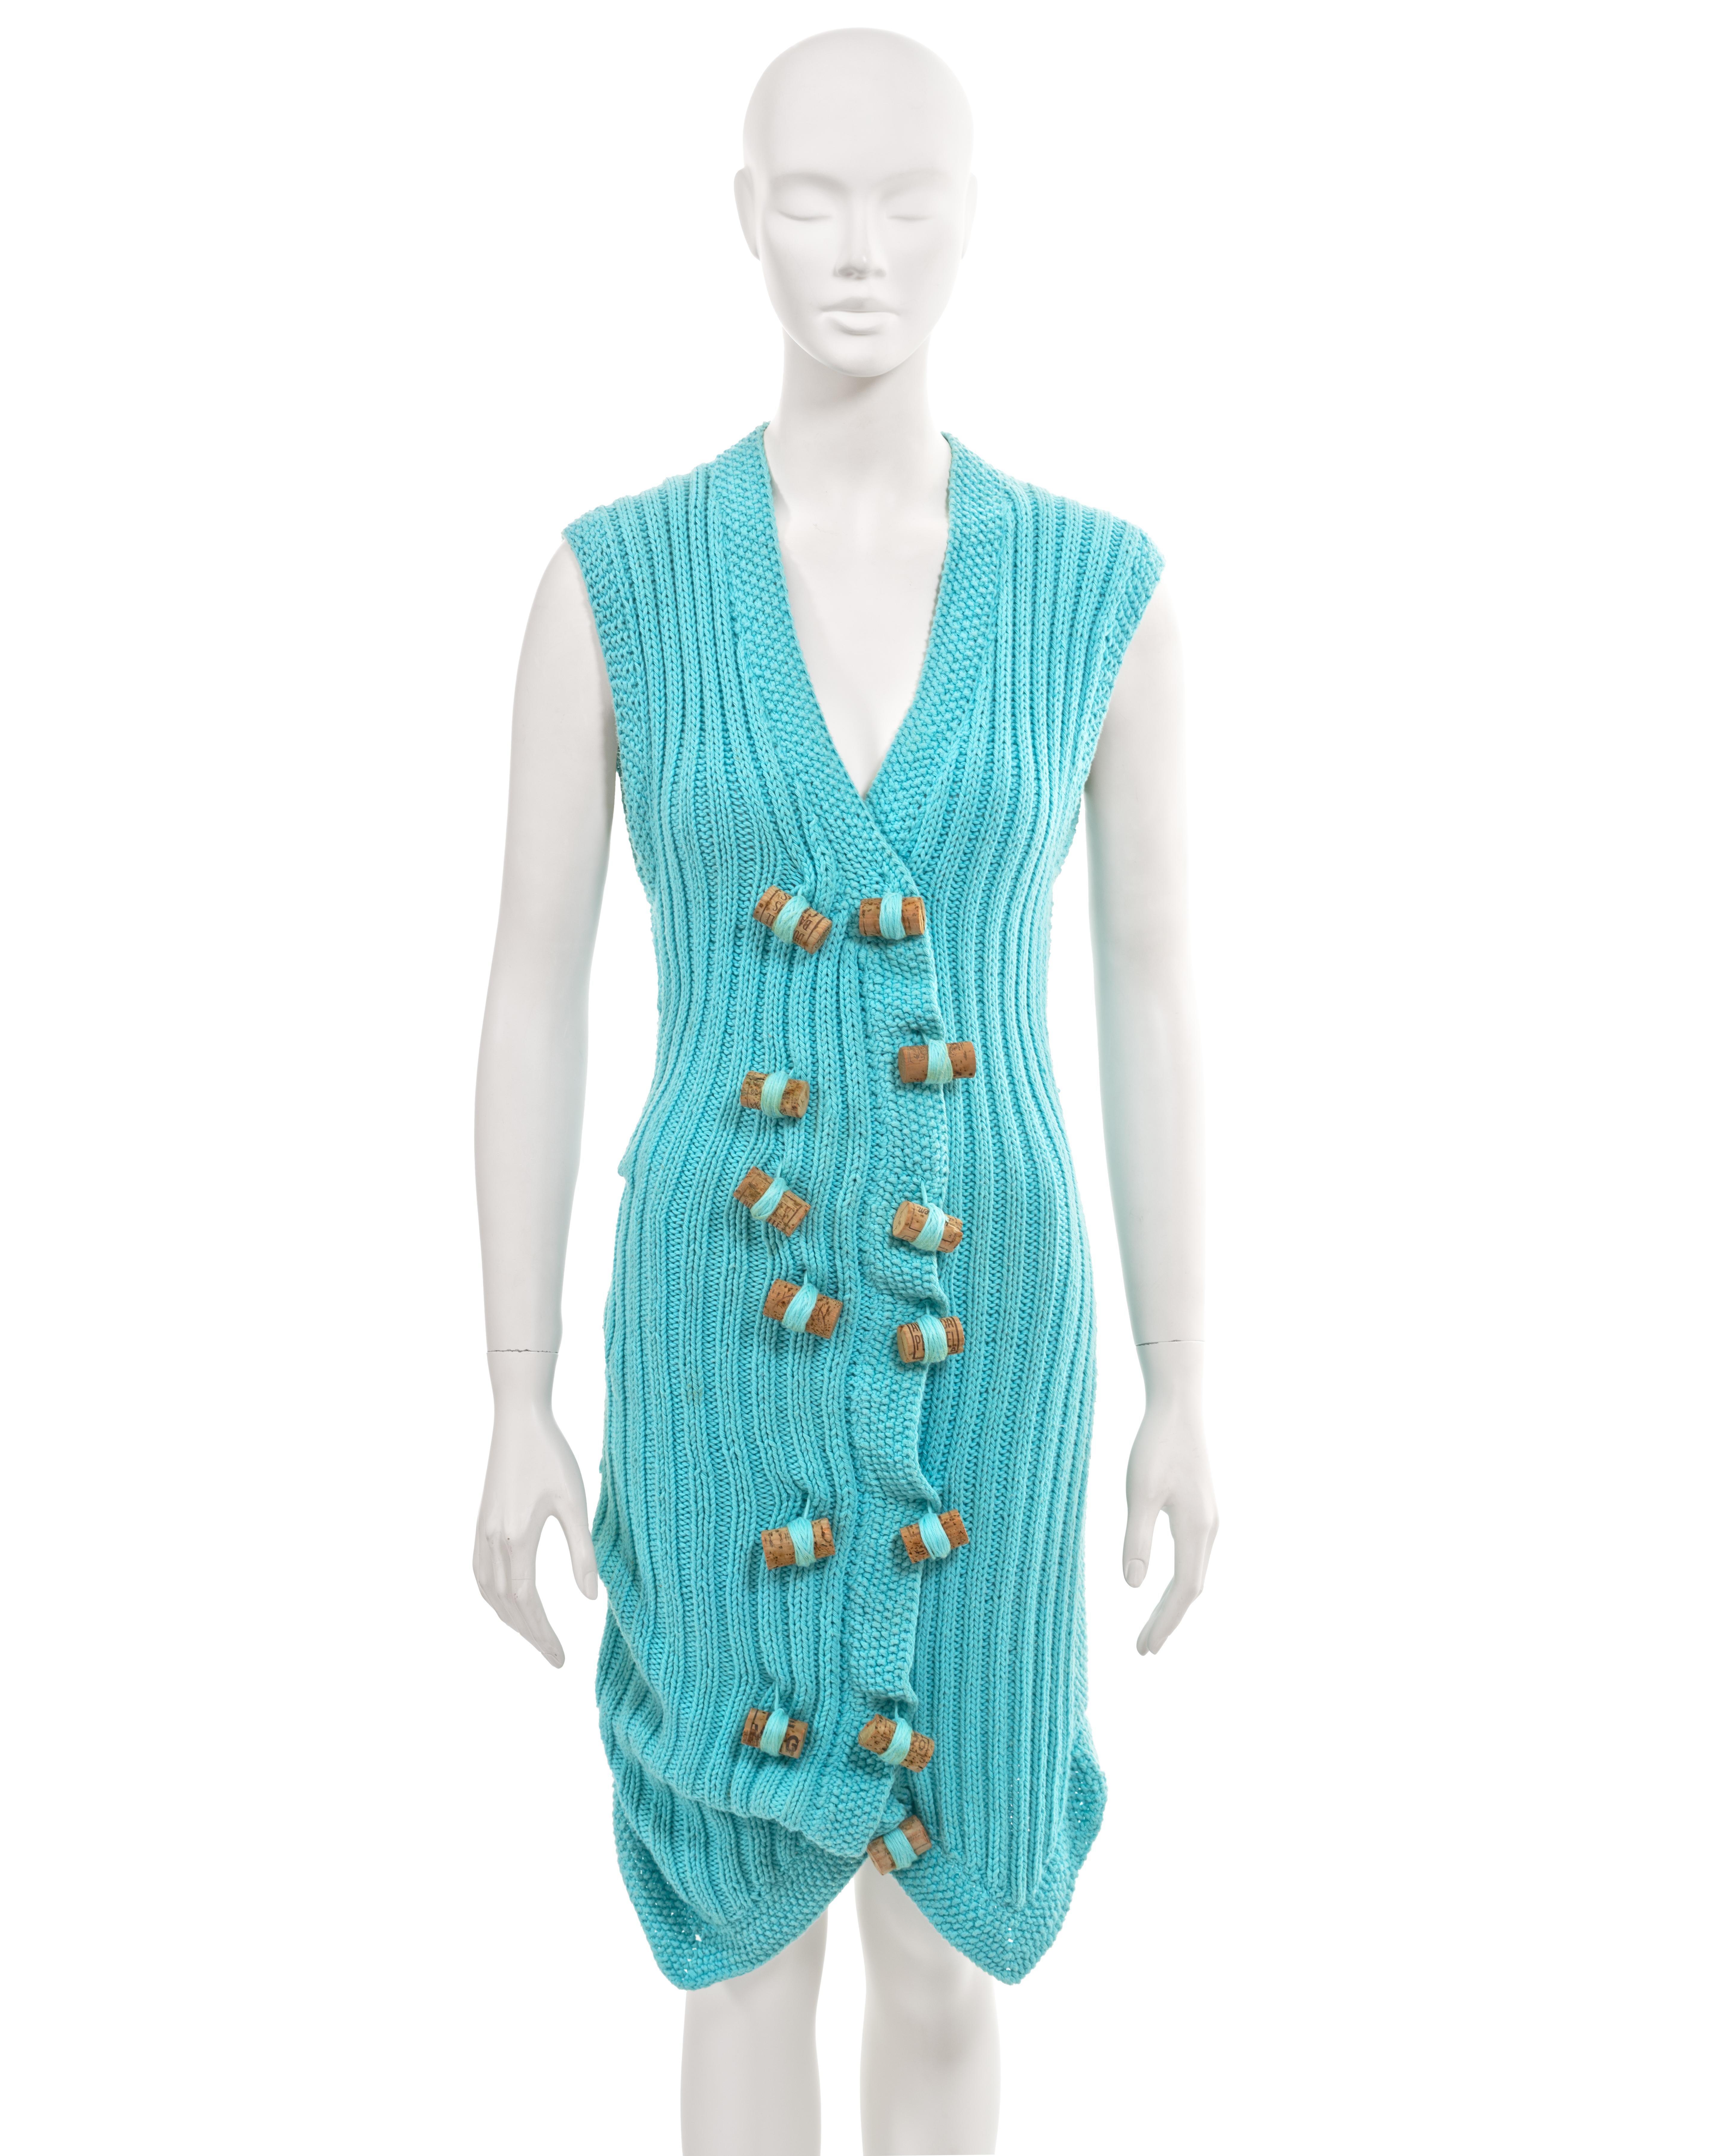 ▪ Archival John Galliano knitted dress
▪ 'The Ludic Game', Fall-Winter 1985
▪ Museum Grade
▪ Hand-knitted using turquoise cotton
▪ The front showcases a ribbed texture
▪ The back features a herringbone pattern
▪ Includes two functional pockets on